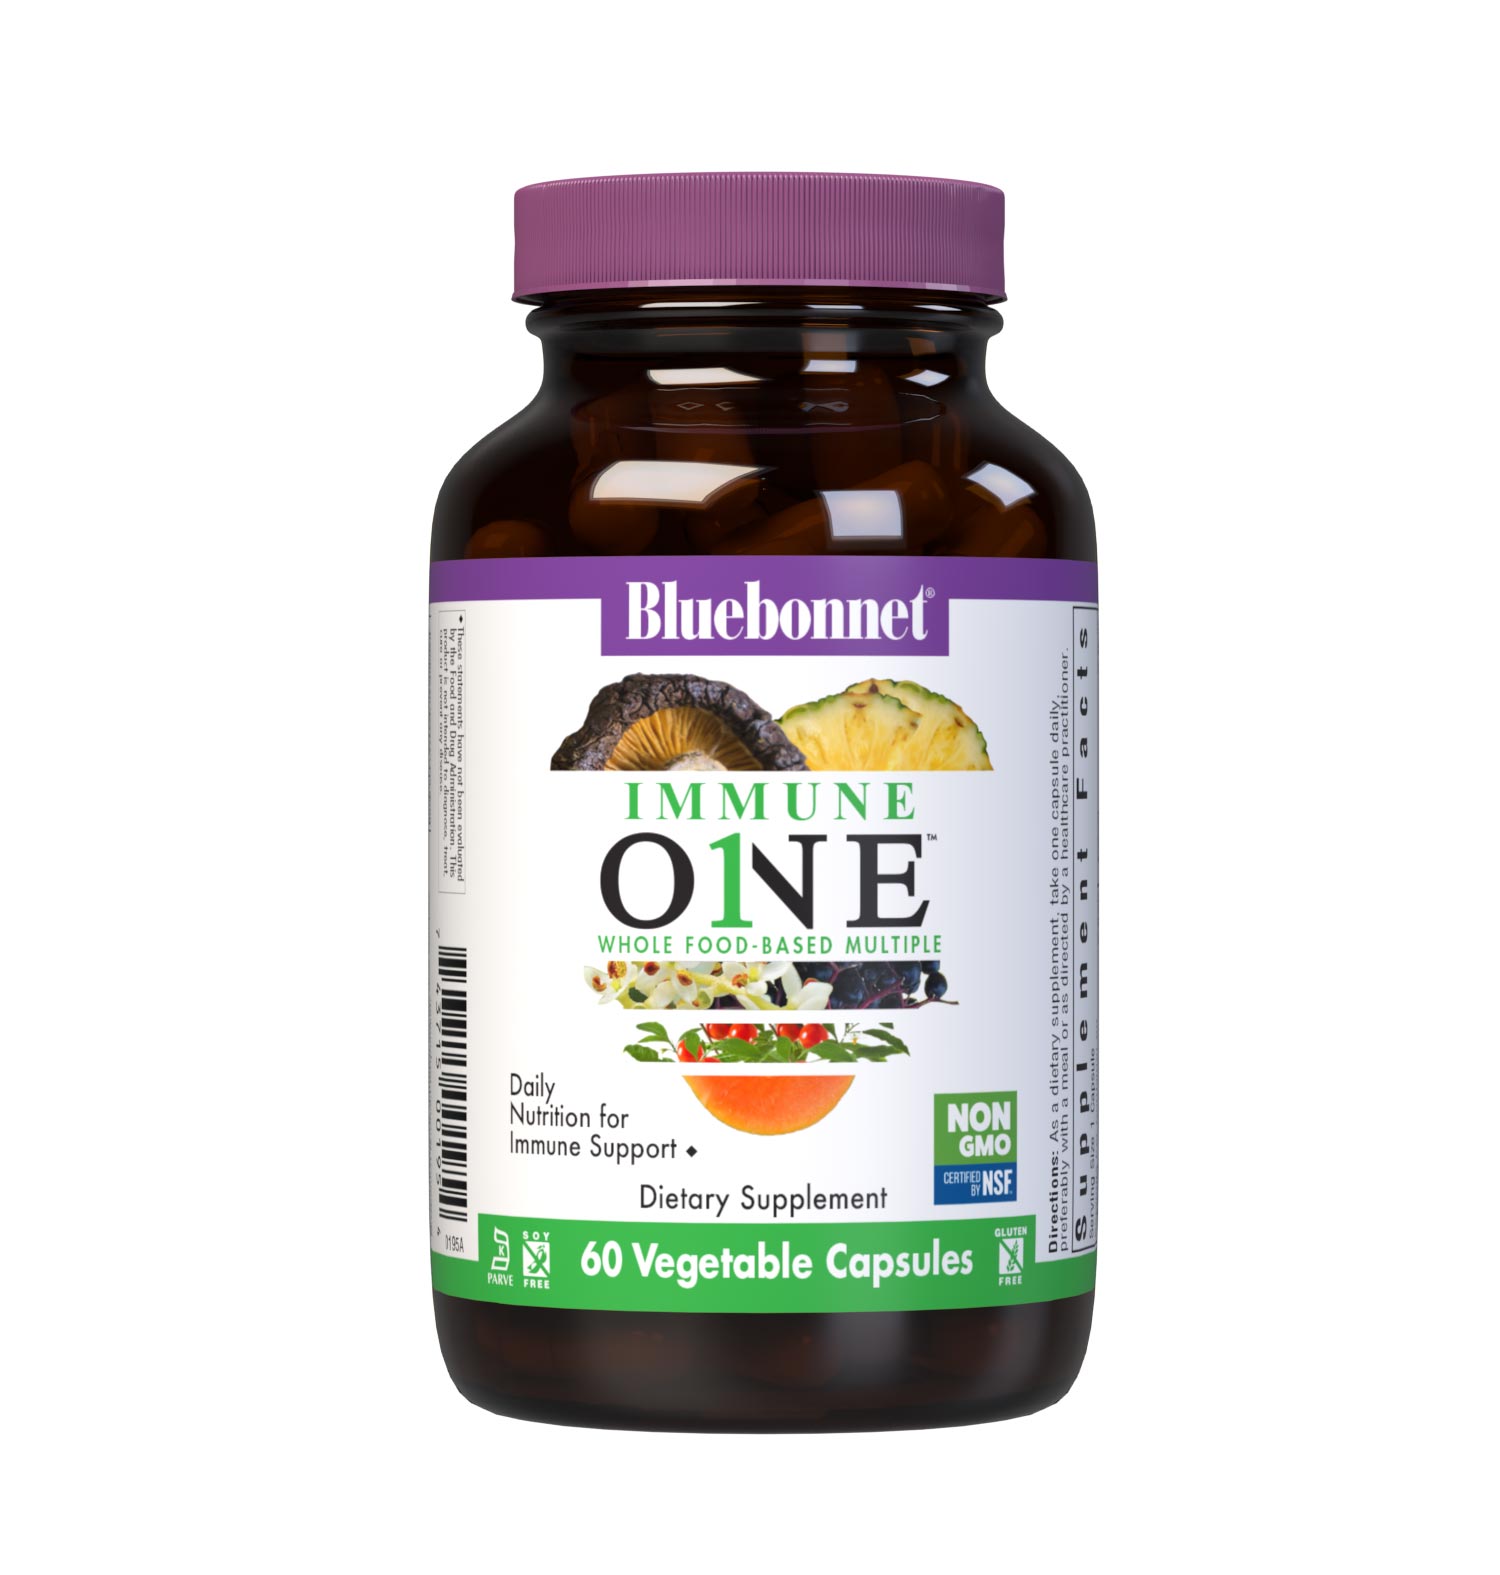 Bluebonnet Nutrition's Immune One 60 vegetable capsules delivers targeted nutrients for respiratory support, sinus comfort, immune defense and antioxidant protection including: Vitamin E derived from Non-GMO sunflower oil Active coenzyme forms of B vitamins. #size_60 count